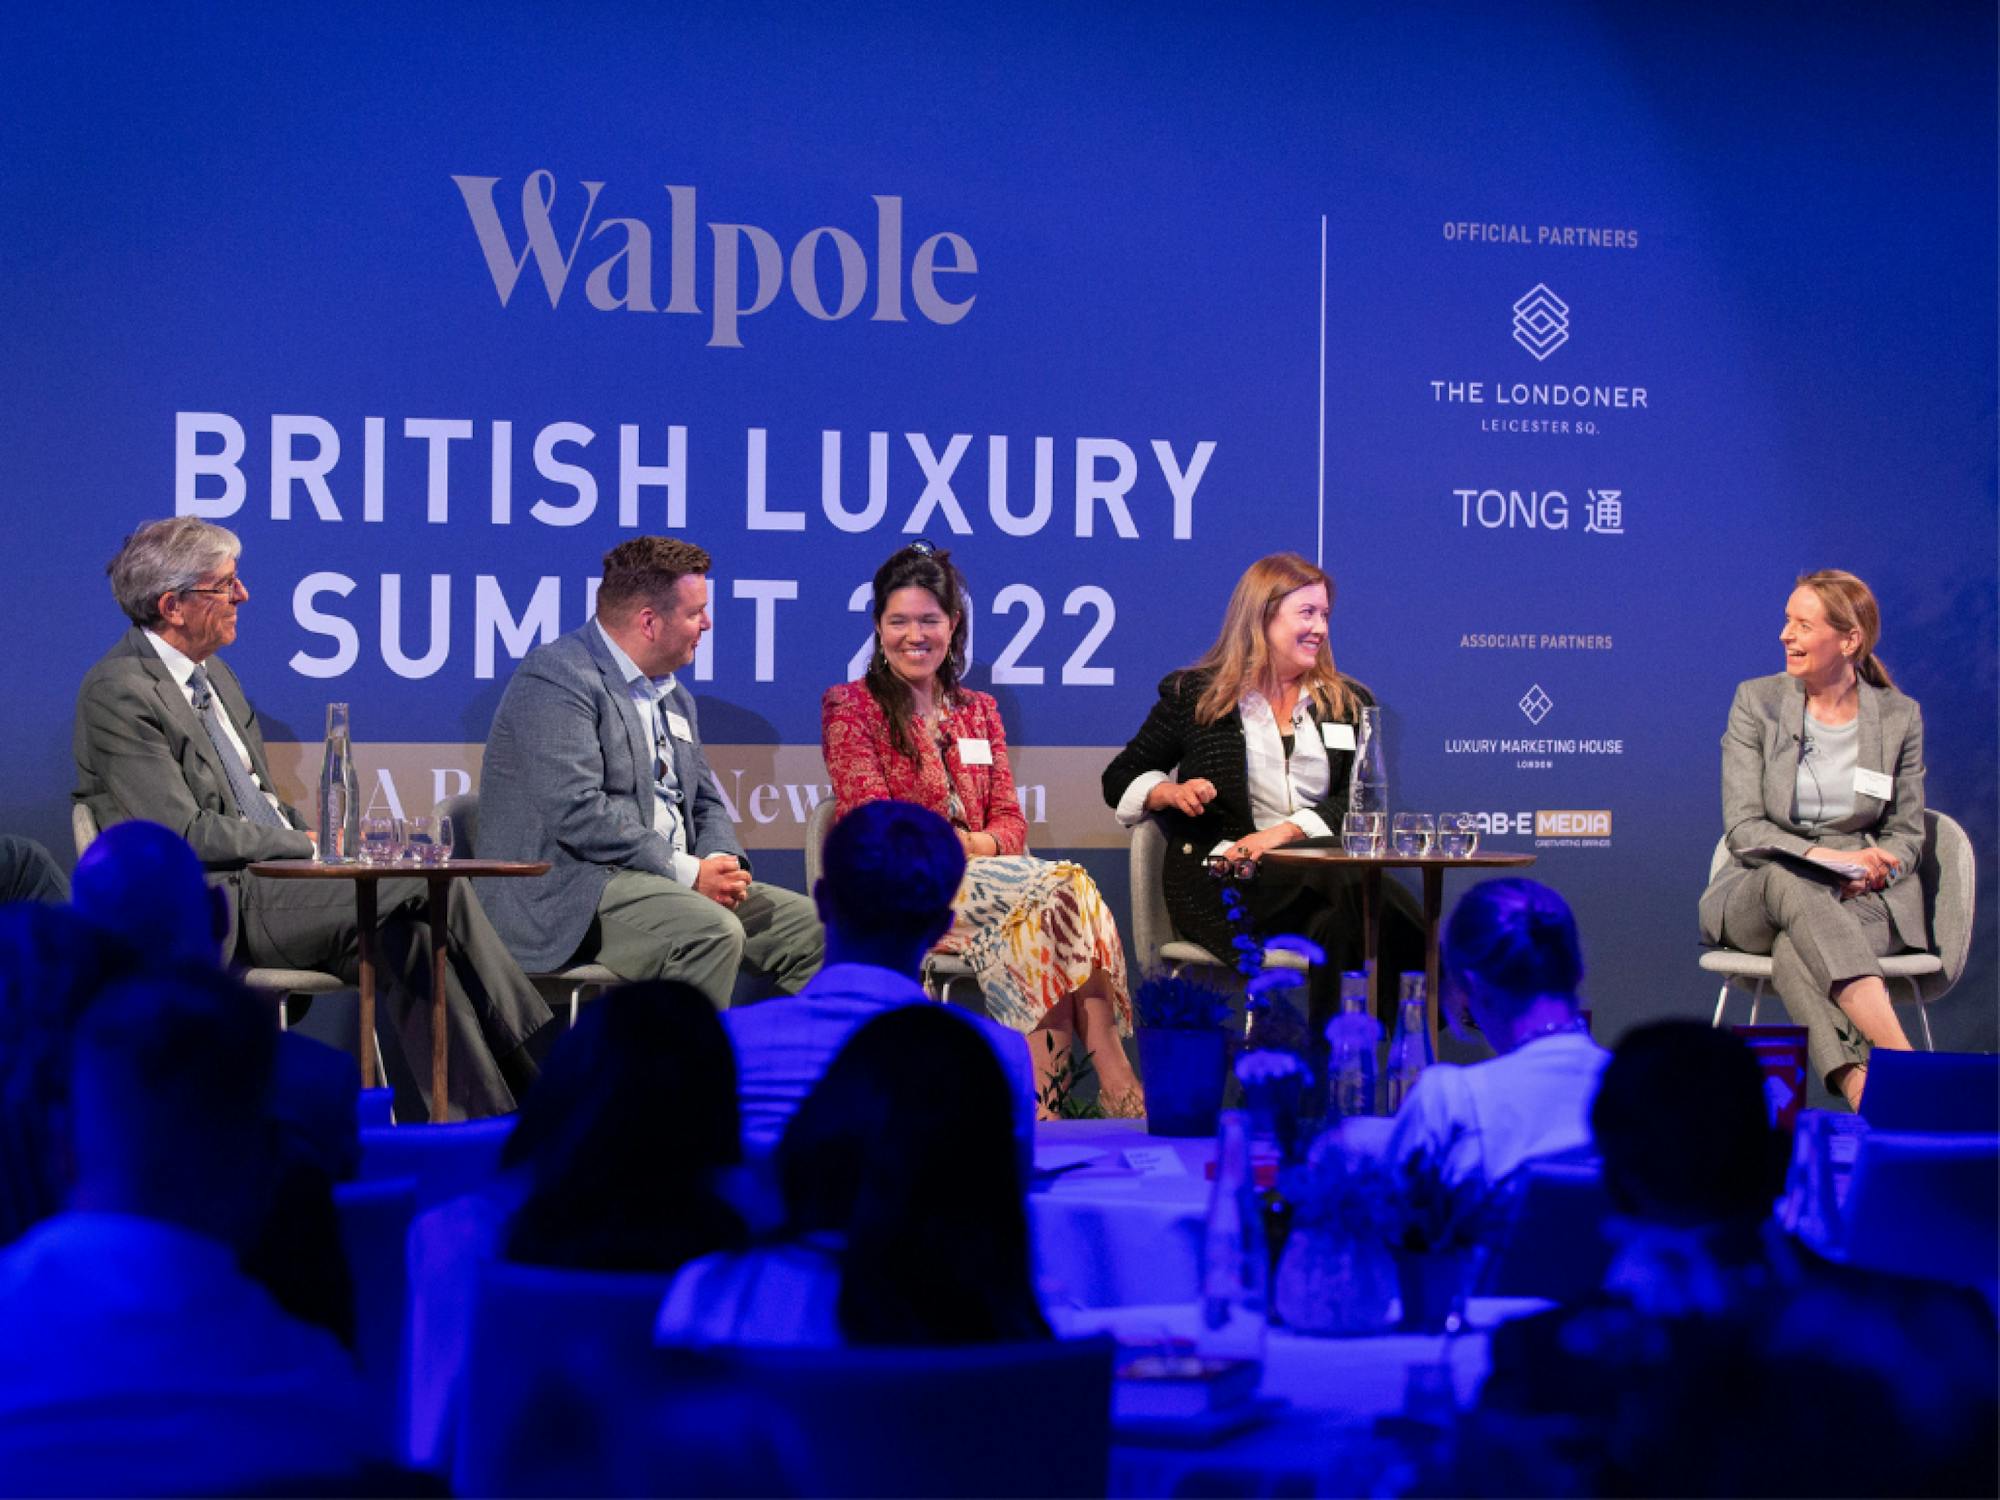 British Luxury Summit All the photos from the Walpole British Luxury Summit 2022 